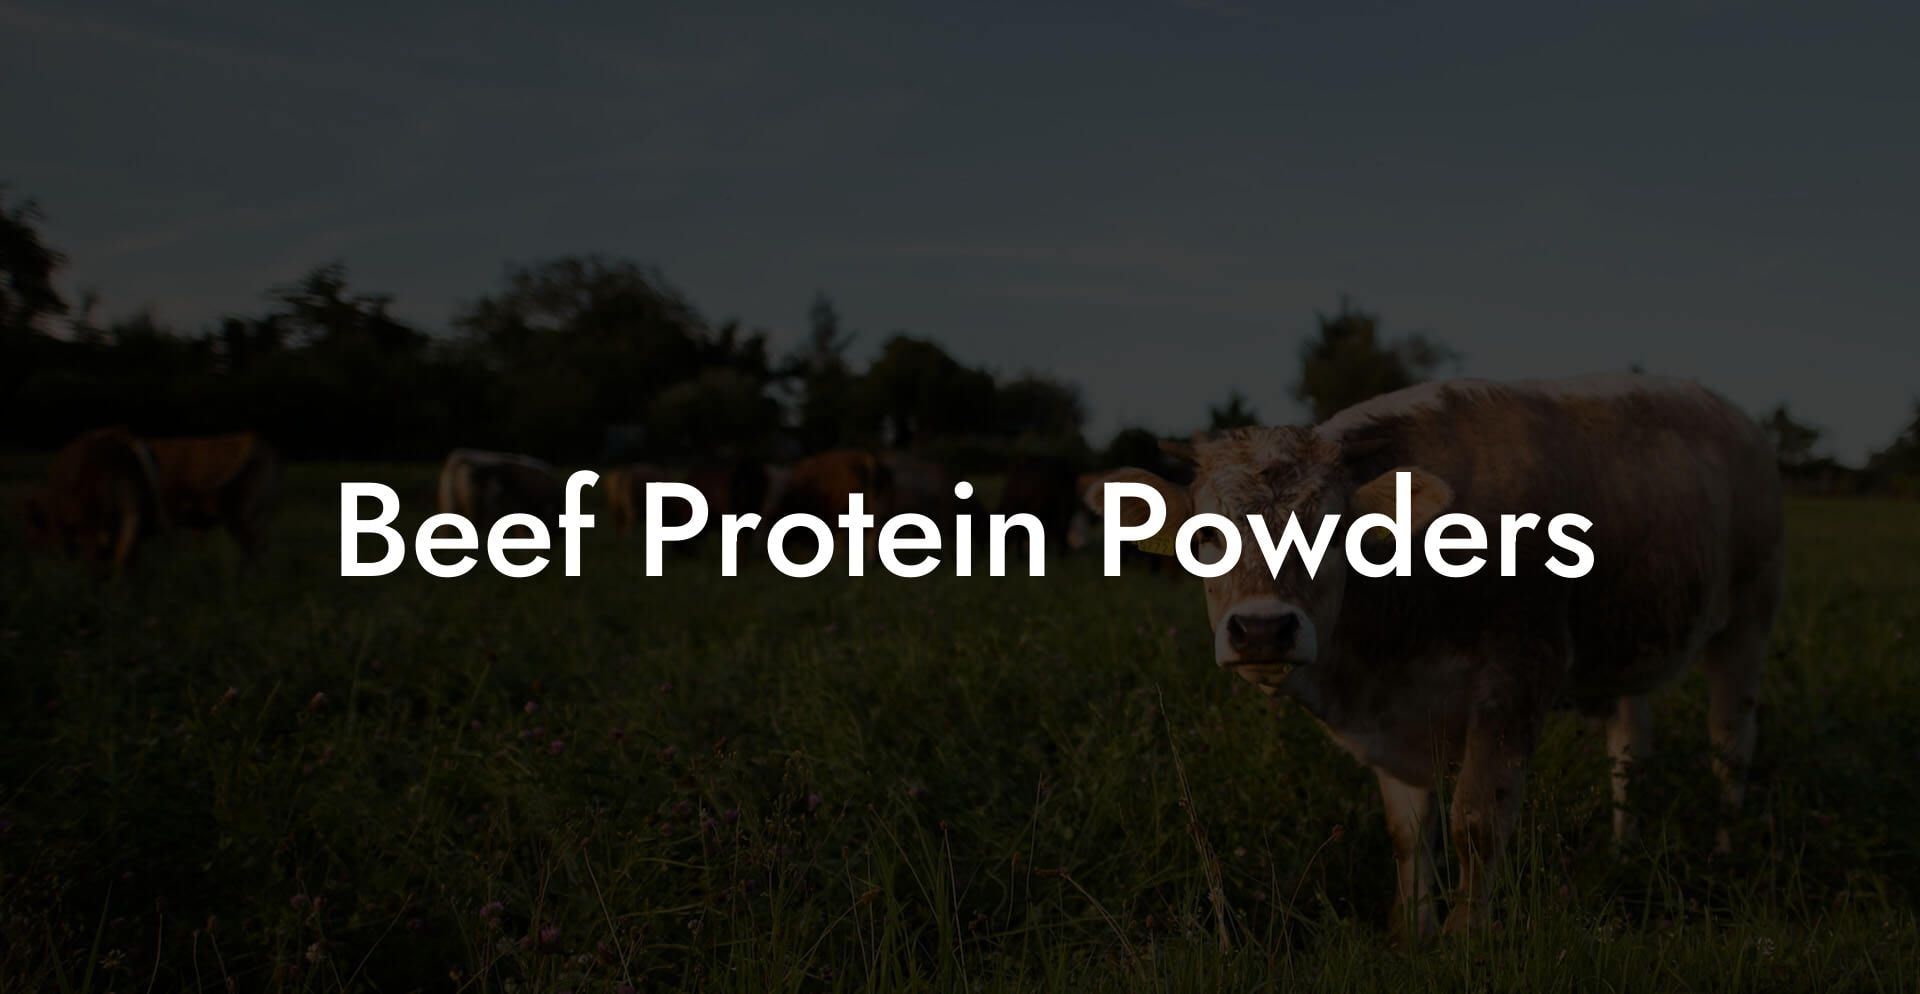 Beef Protein Powders